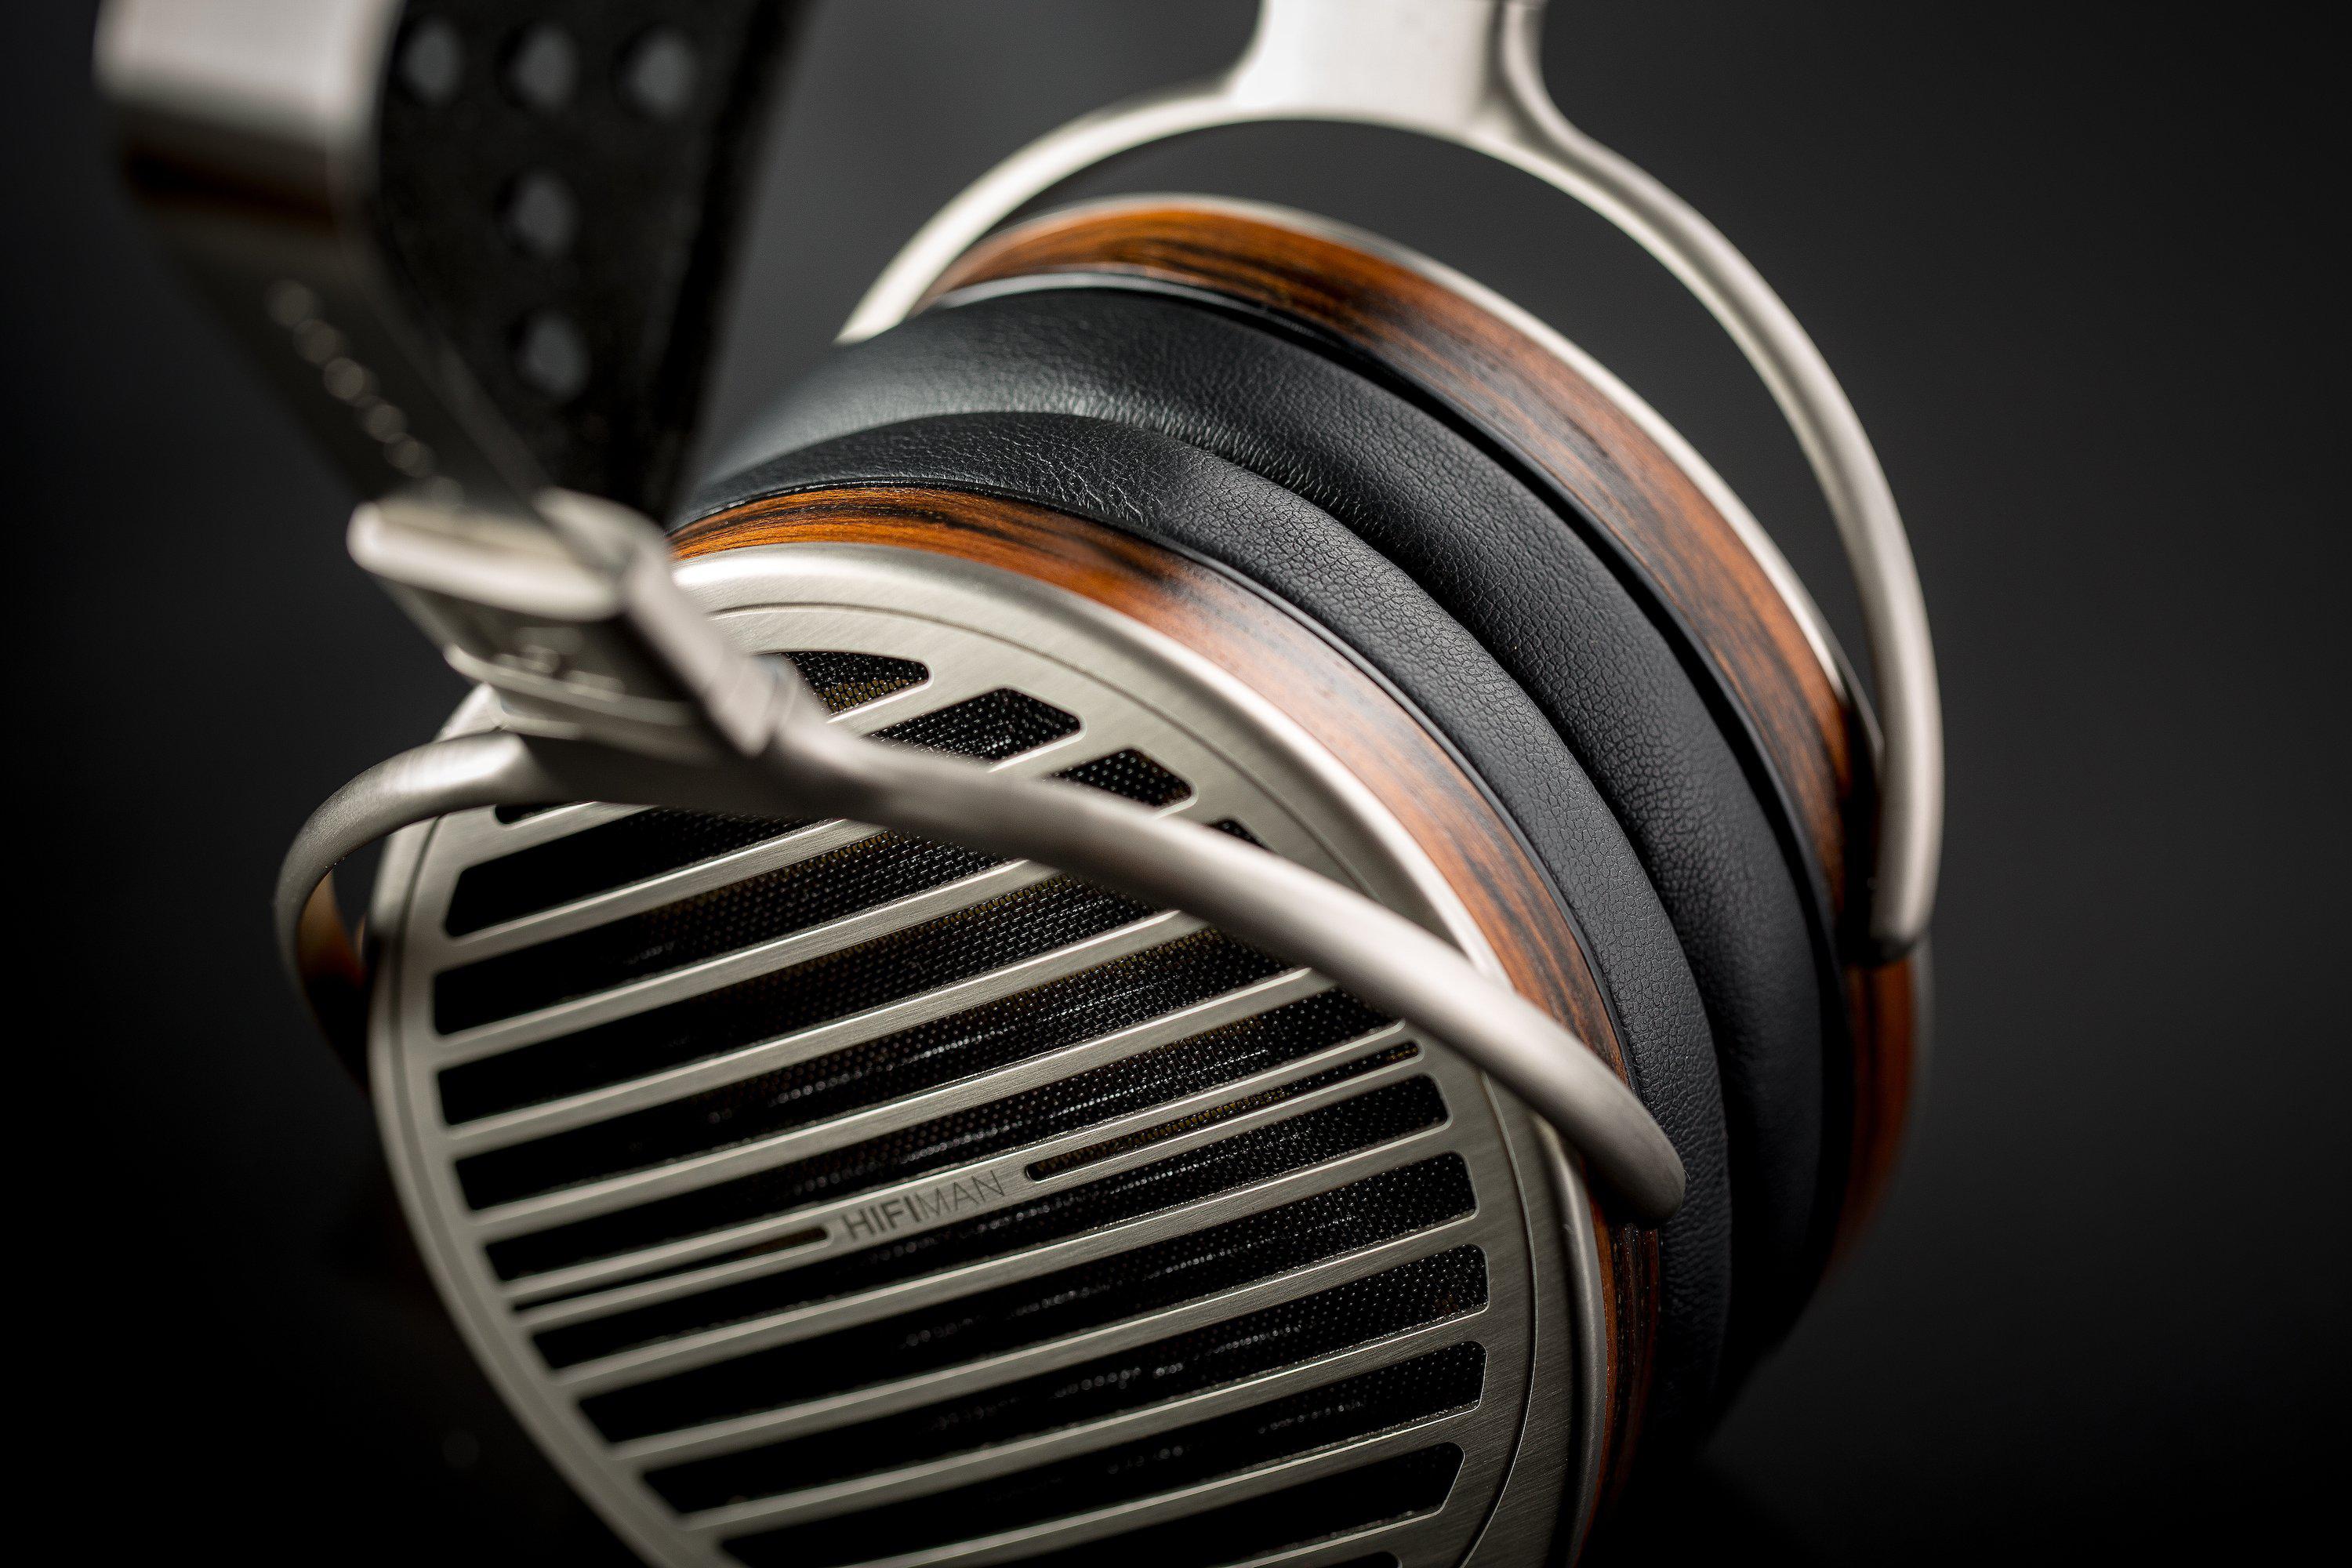 What's the Best HIFIMAN Headphone for Me?